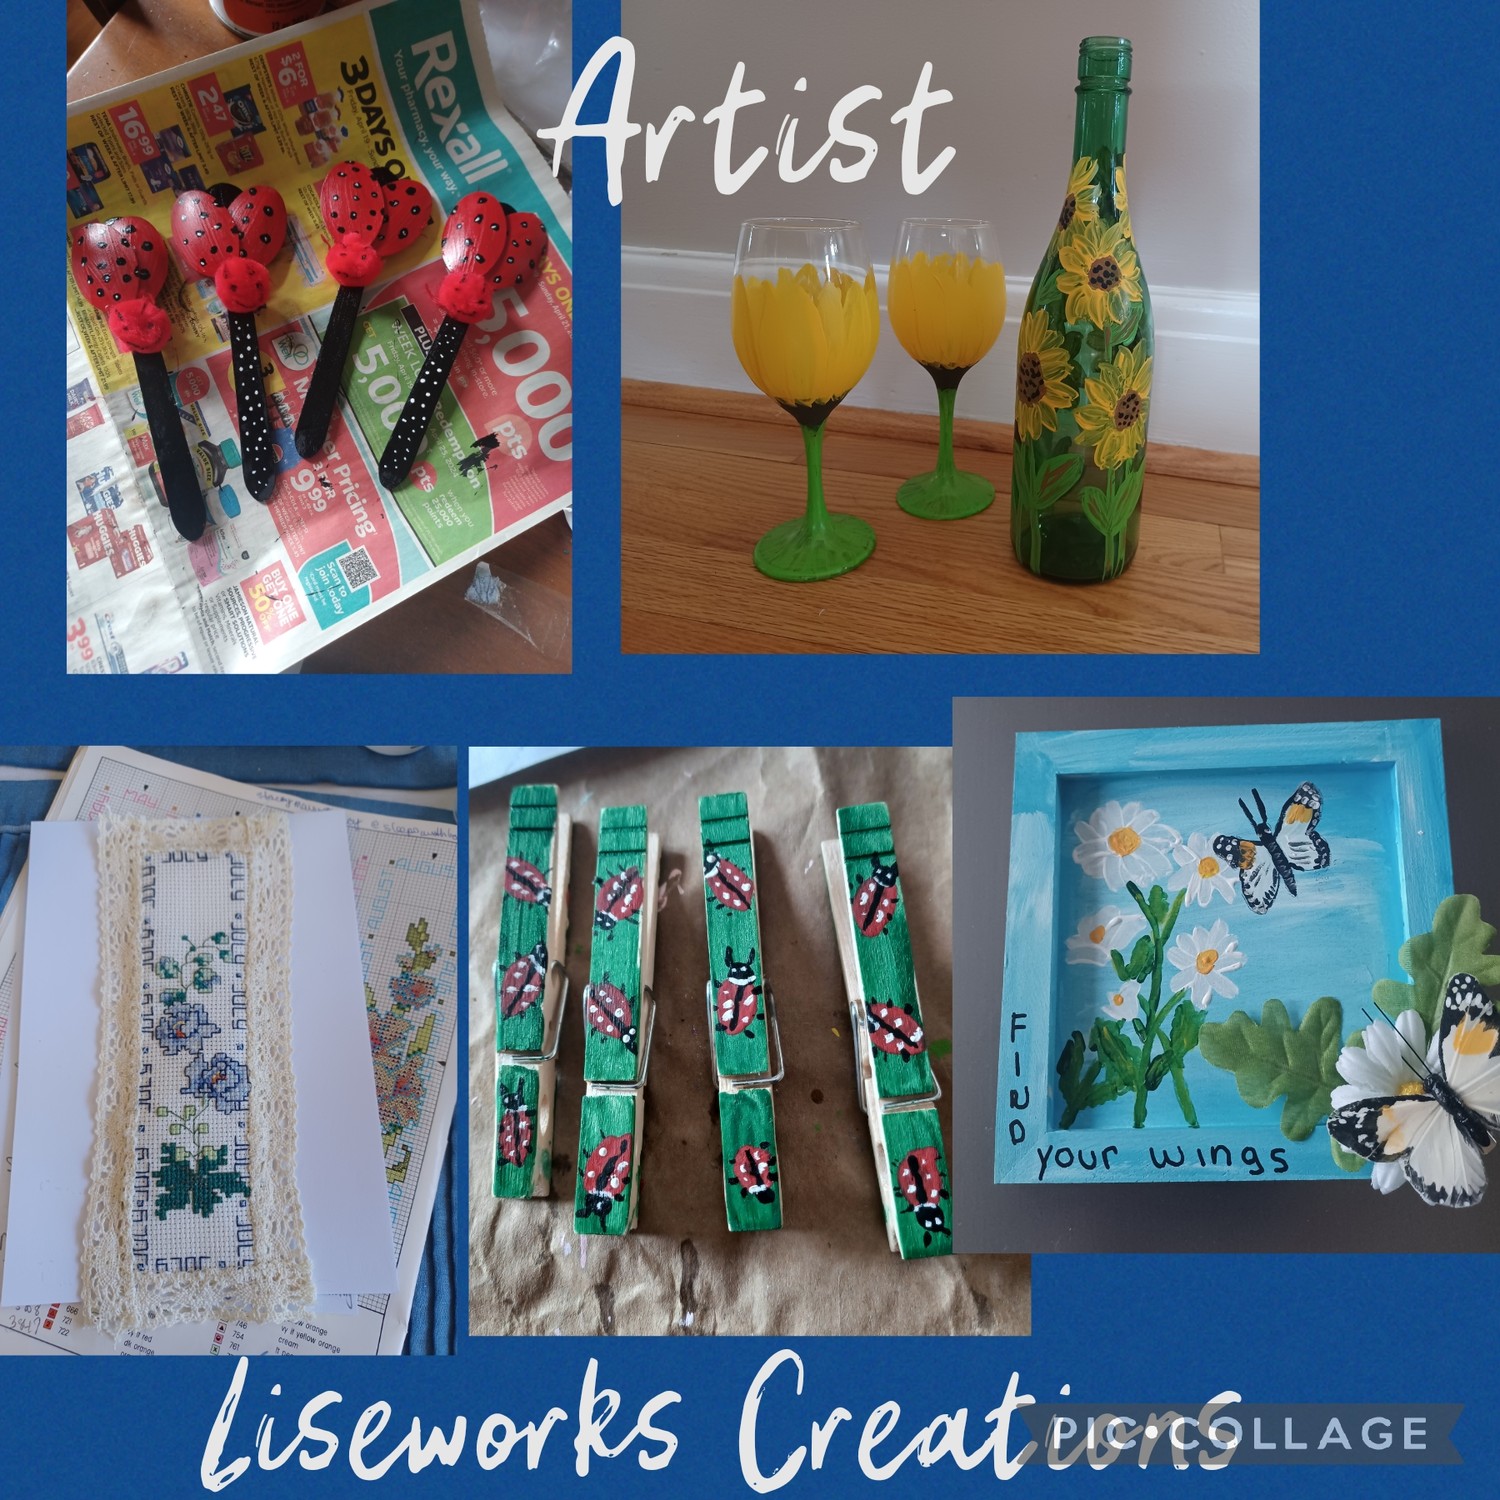 Liseworks Creations
Bookmarks, Greeting Cards, key chains, post cards, hand painted glassware